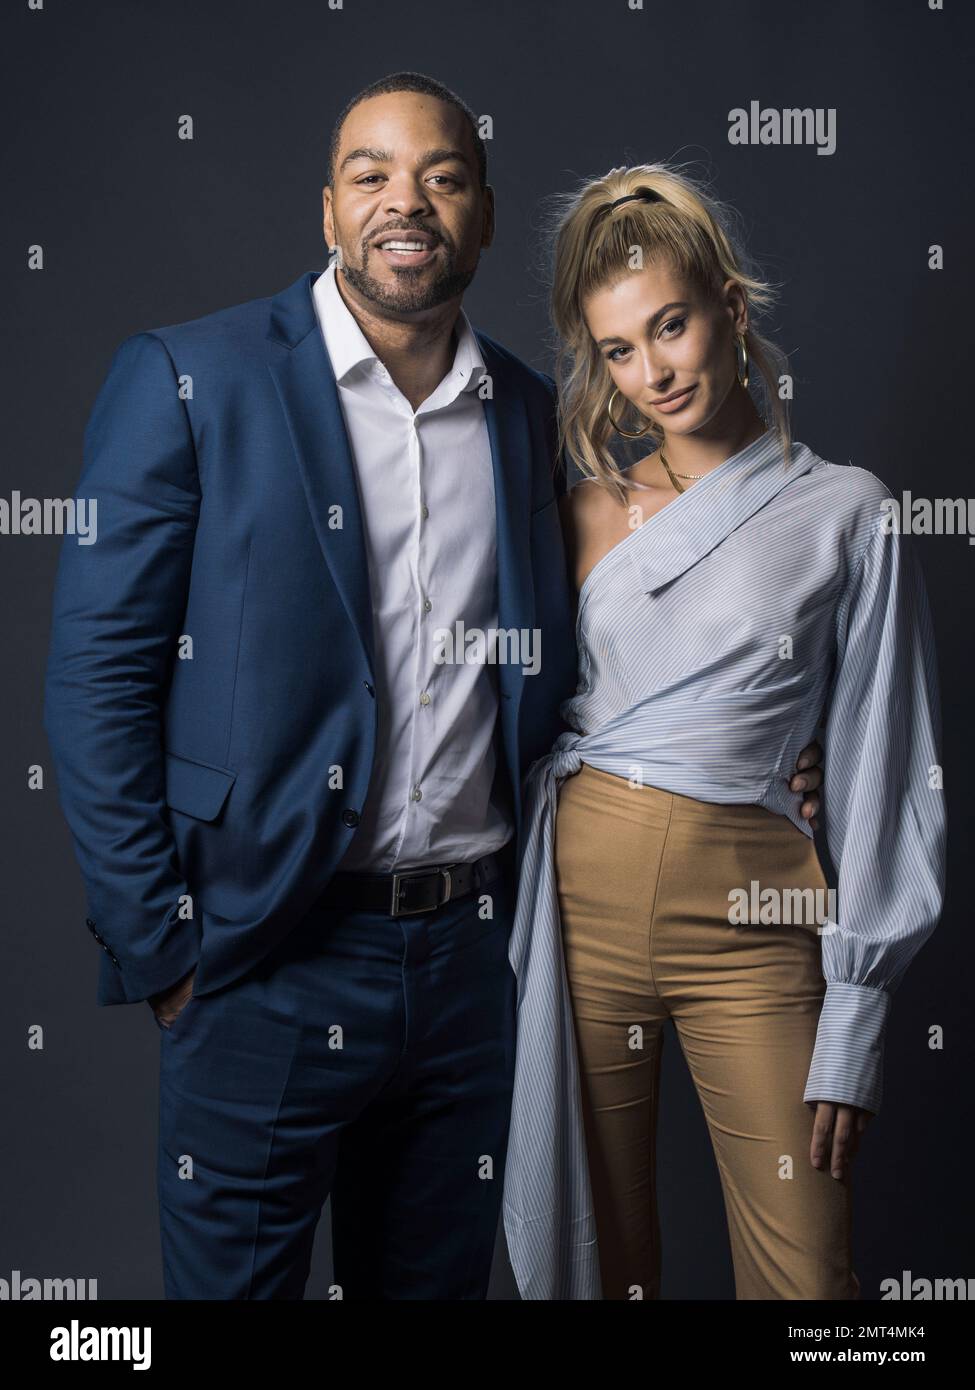 Method Man, left, and Hailey Baldwin pose for a portrait while promoting " Drop the Mic" during the Television Critics Association Summer Press Tour  on Thursday, July 27, 2017, in Beverly Hills, Calif. (